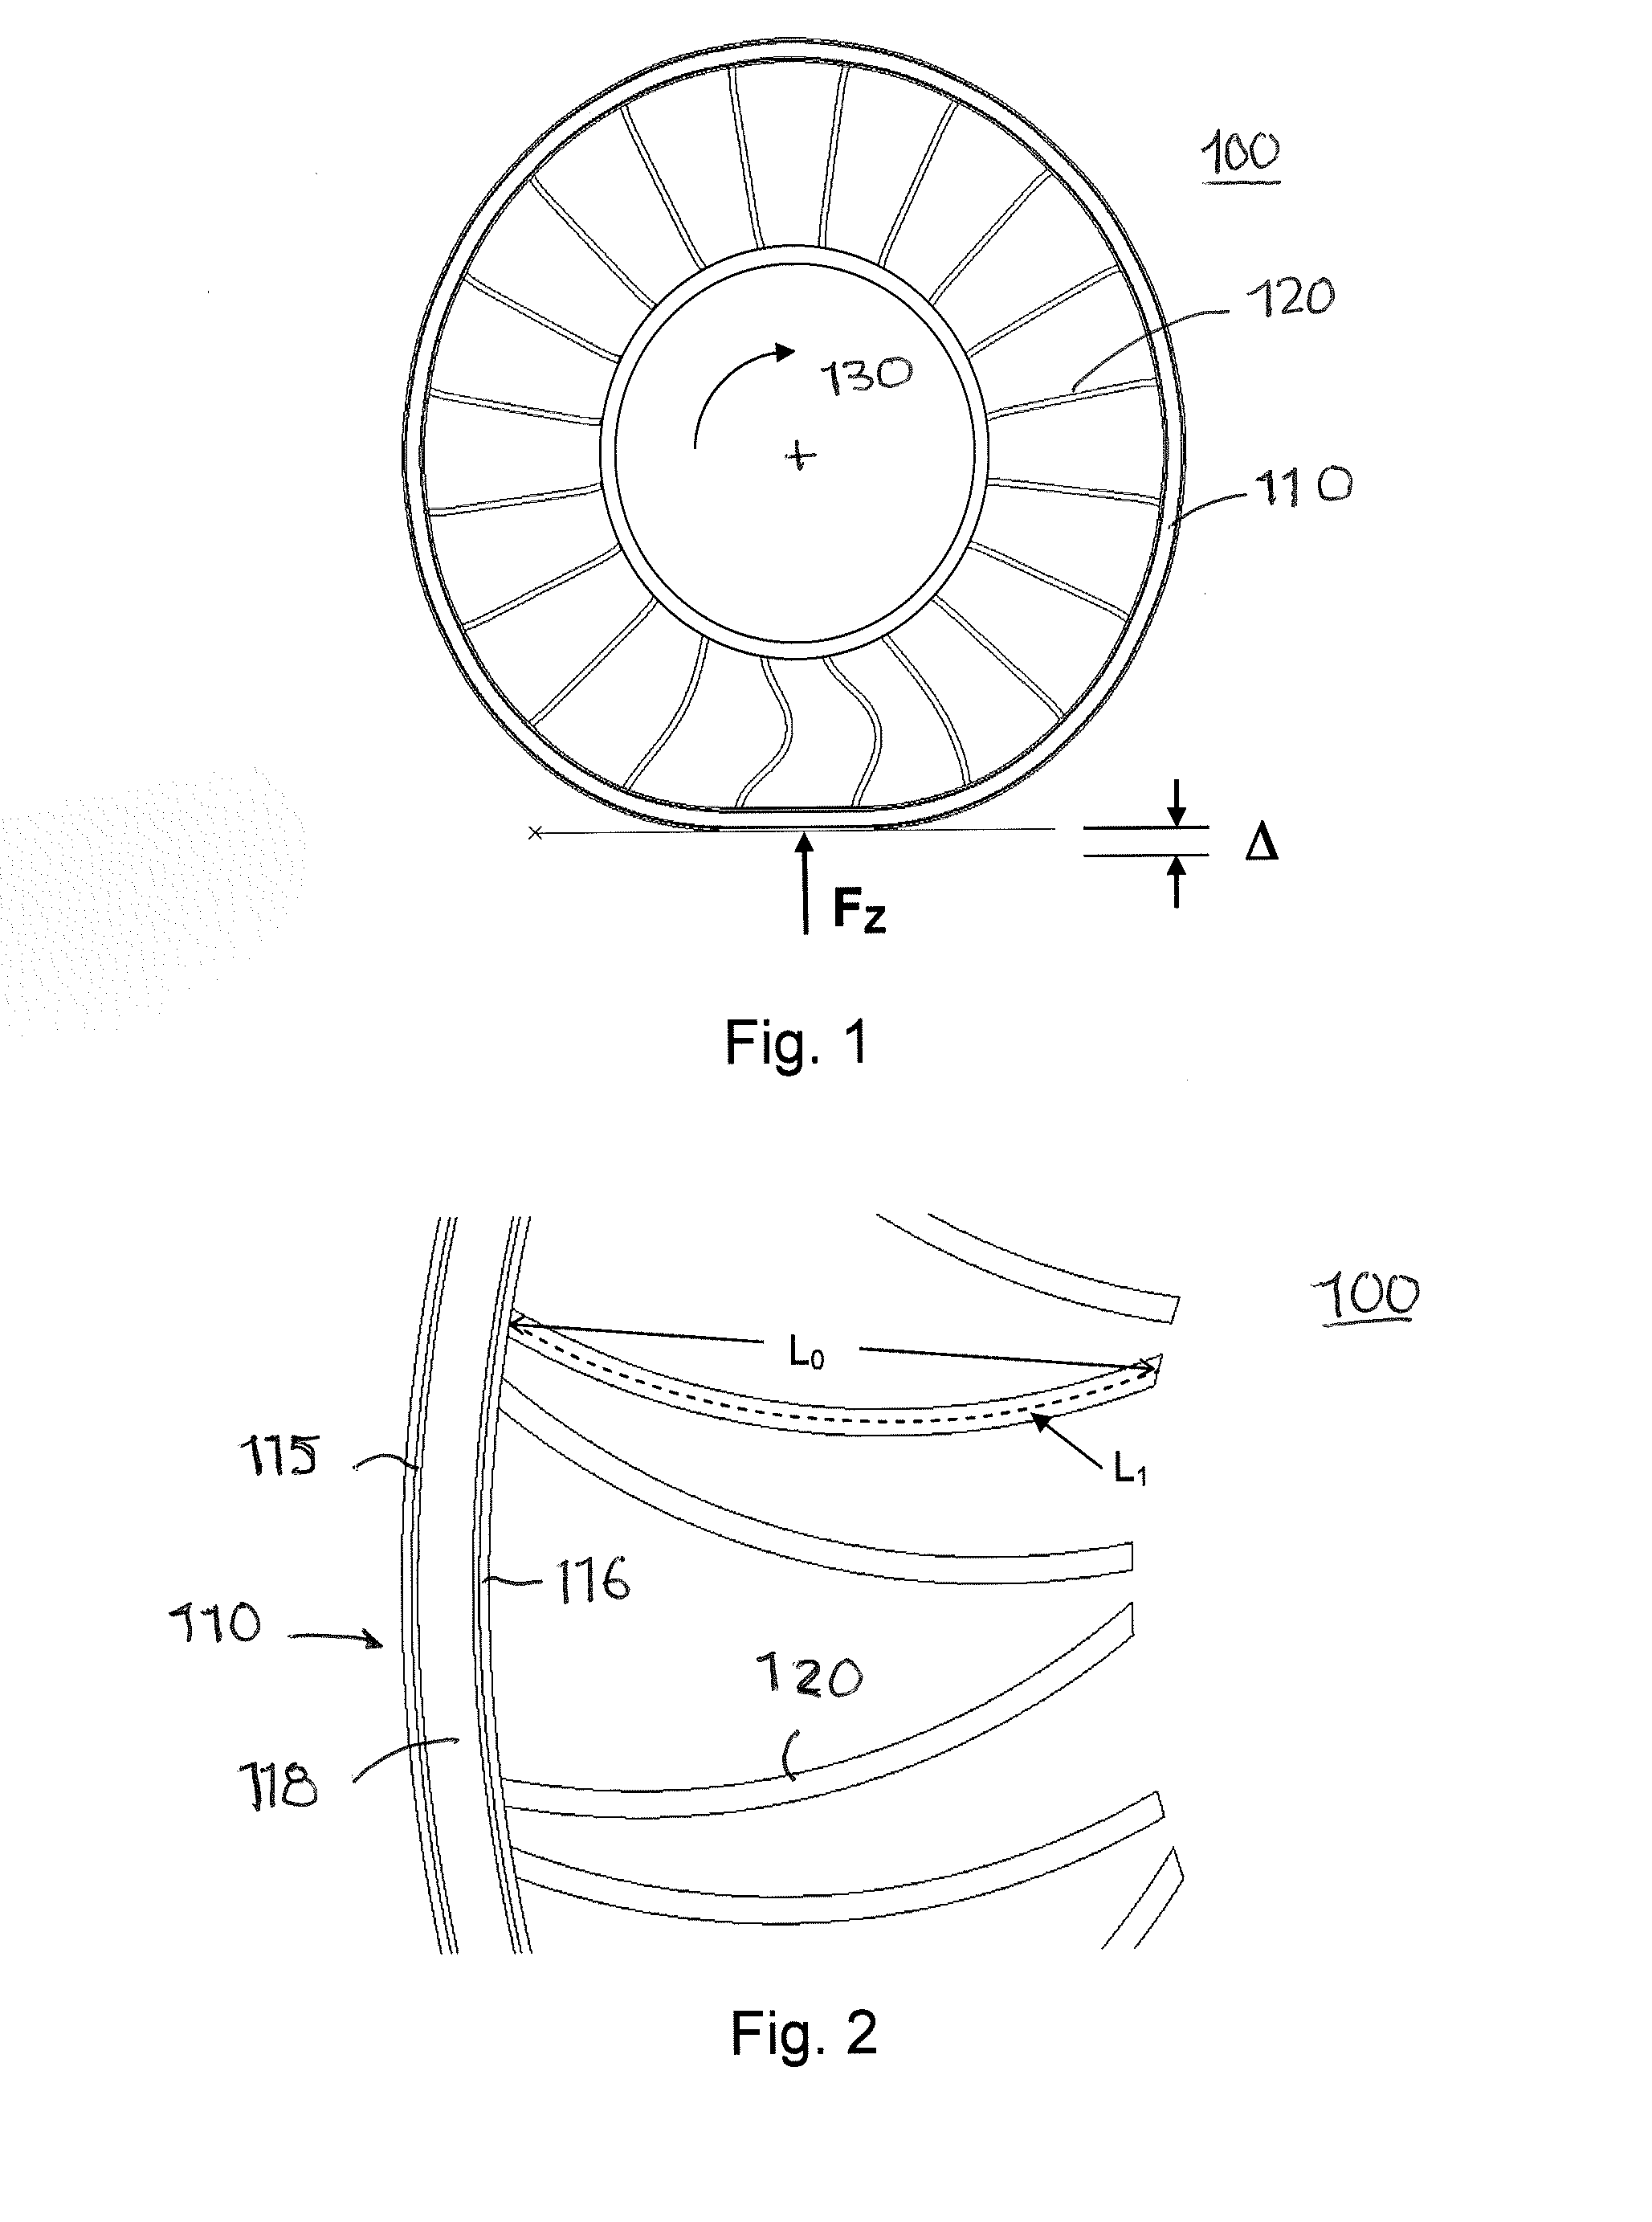 Variable Stiffness Spoke For a Non-Pneumatic Assembly